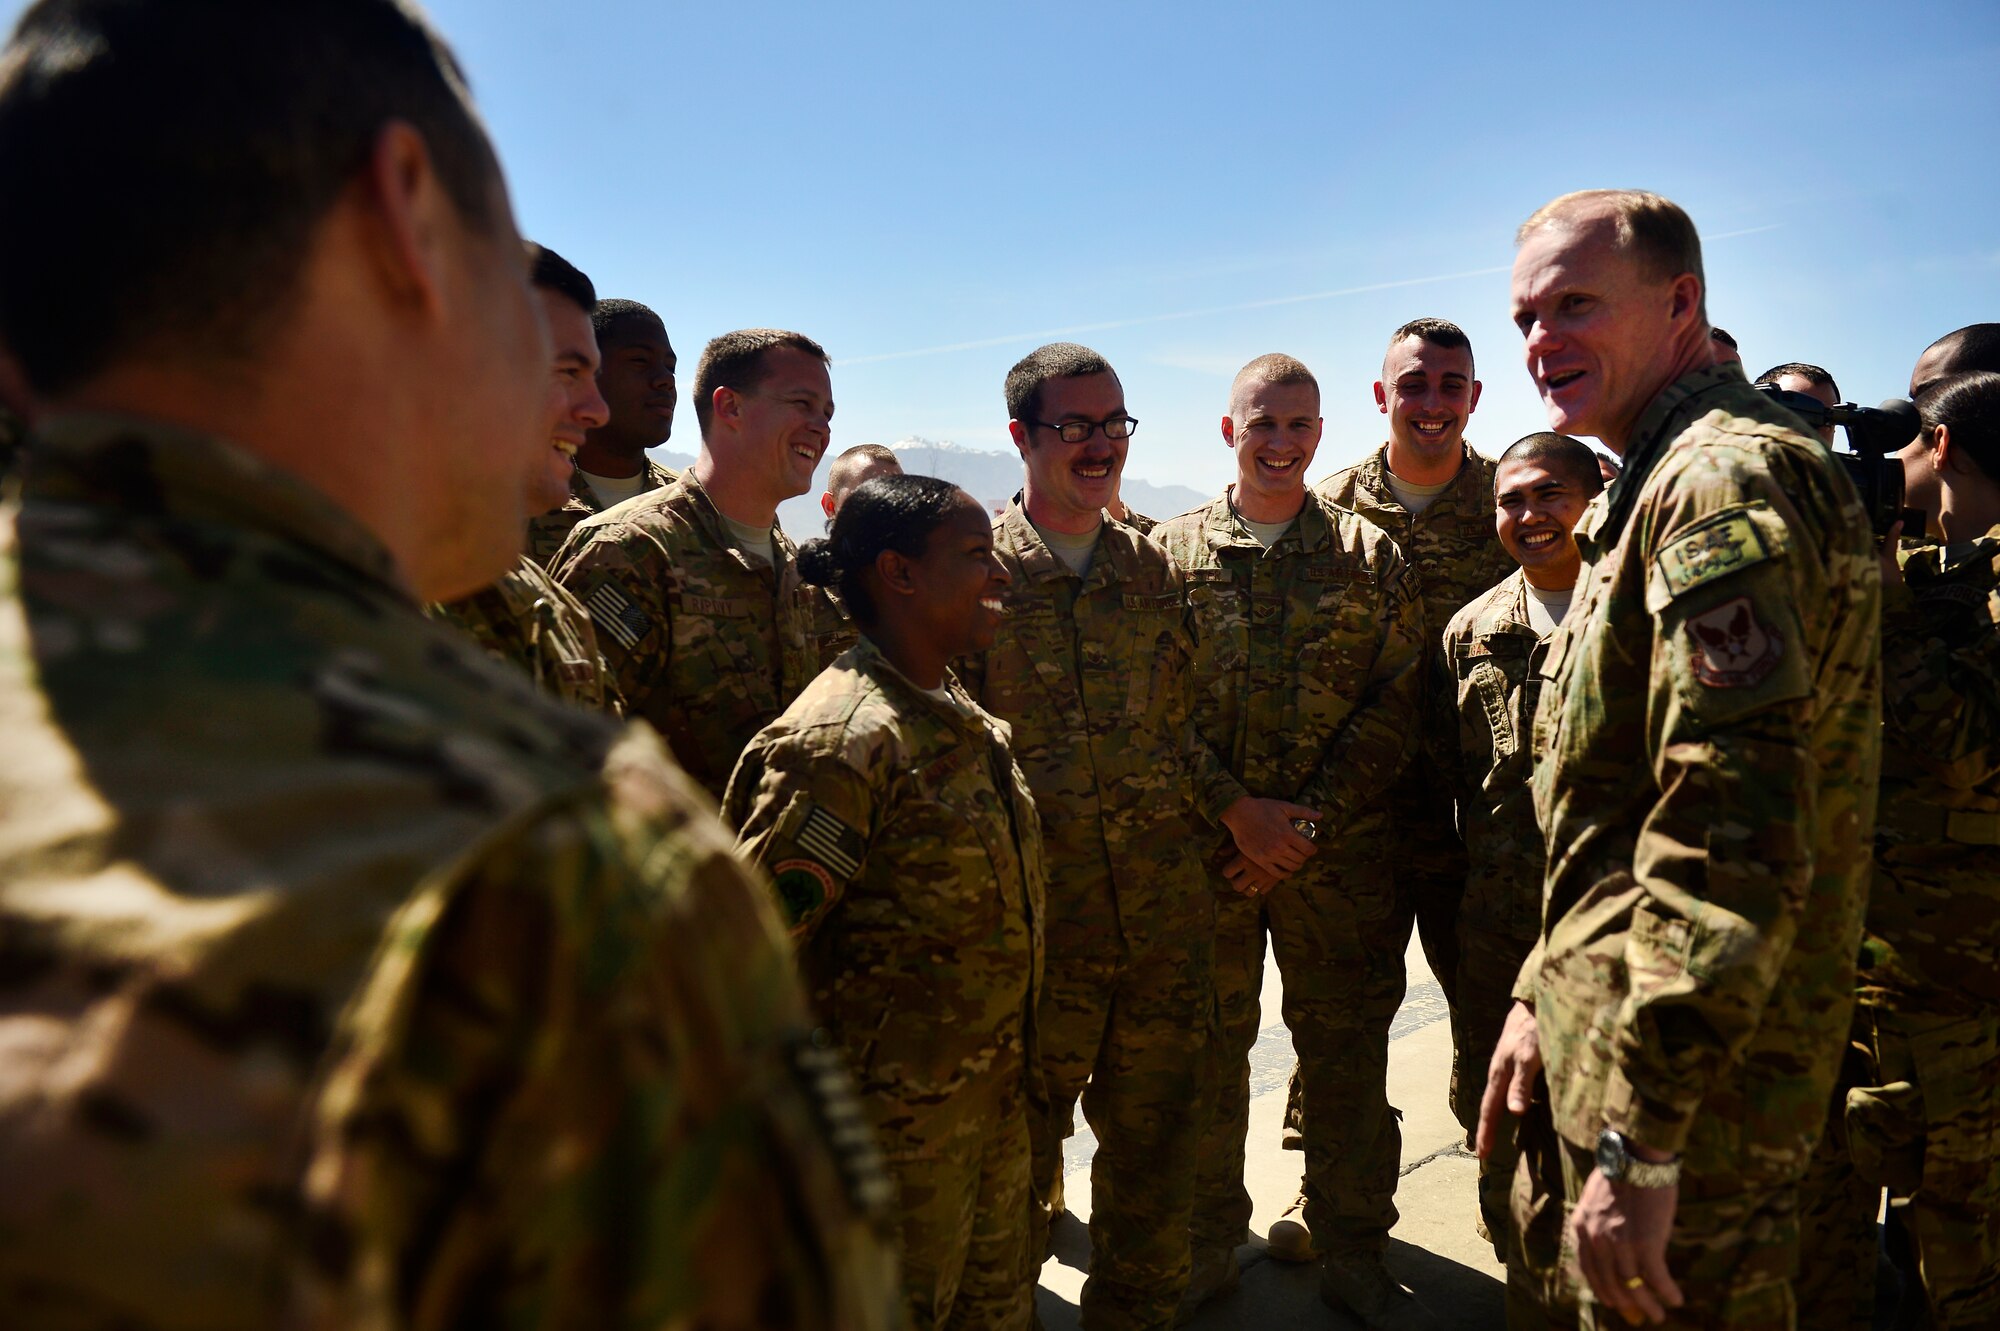 Chief Master Sgt. of the Air Force James Cody speaks with 455th Expeditionary Maintenance Support Group Airmen during a visit to Bagram Air Field, Afghanistan, April 13, 2014. Cody visited Bagram Air Field to encourage, inform and congratulate Airmen for hard work throughout Operation Enduring Freedom. (U.S. Air Force photo/Staff Sgt. Vernon Young Jr.)